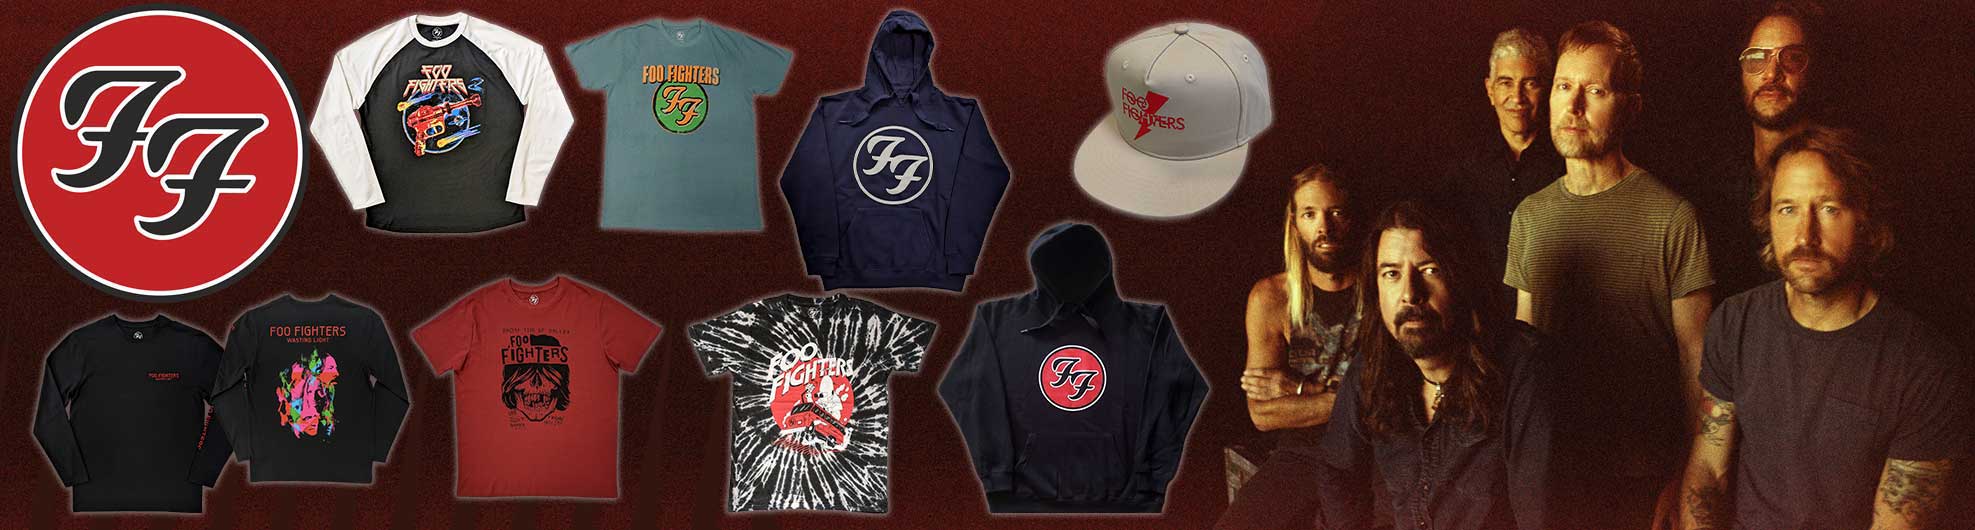 Official Licensed Wholesale Foo Fighters Merchandise